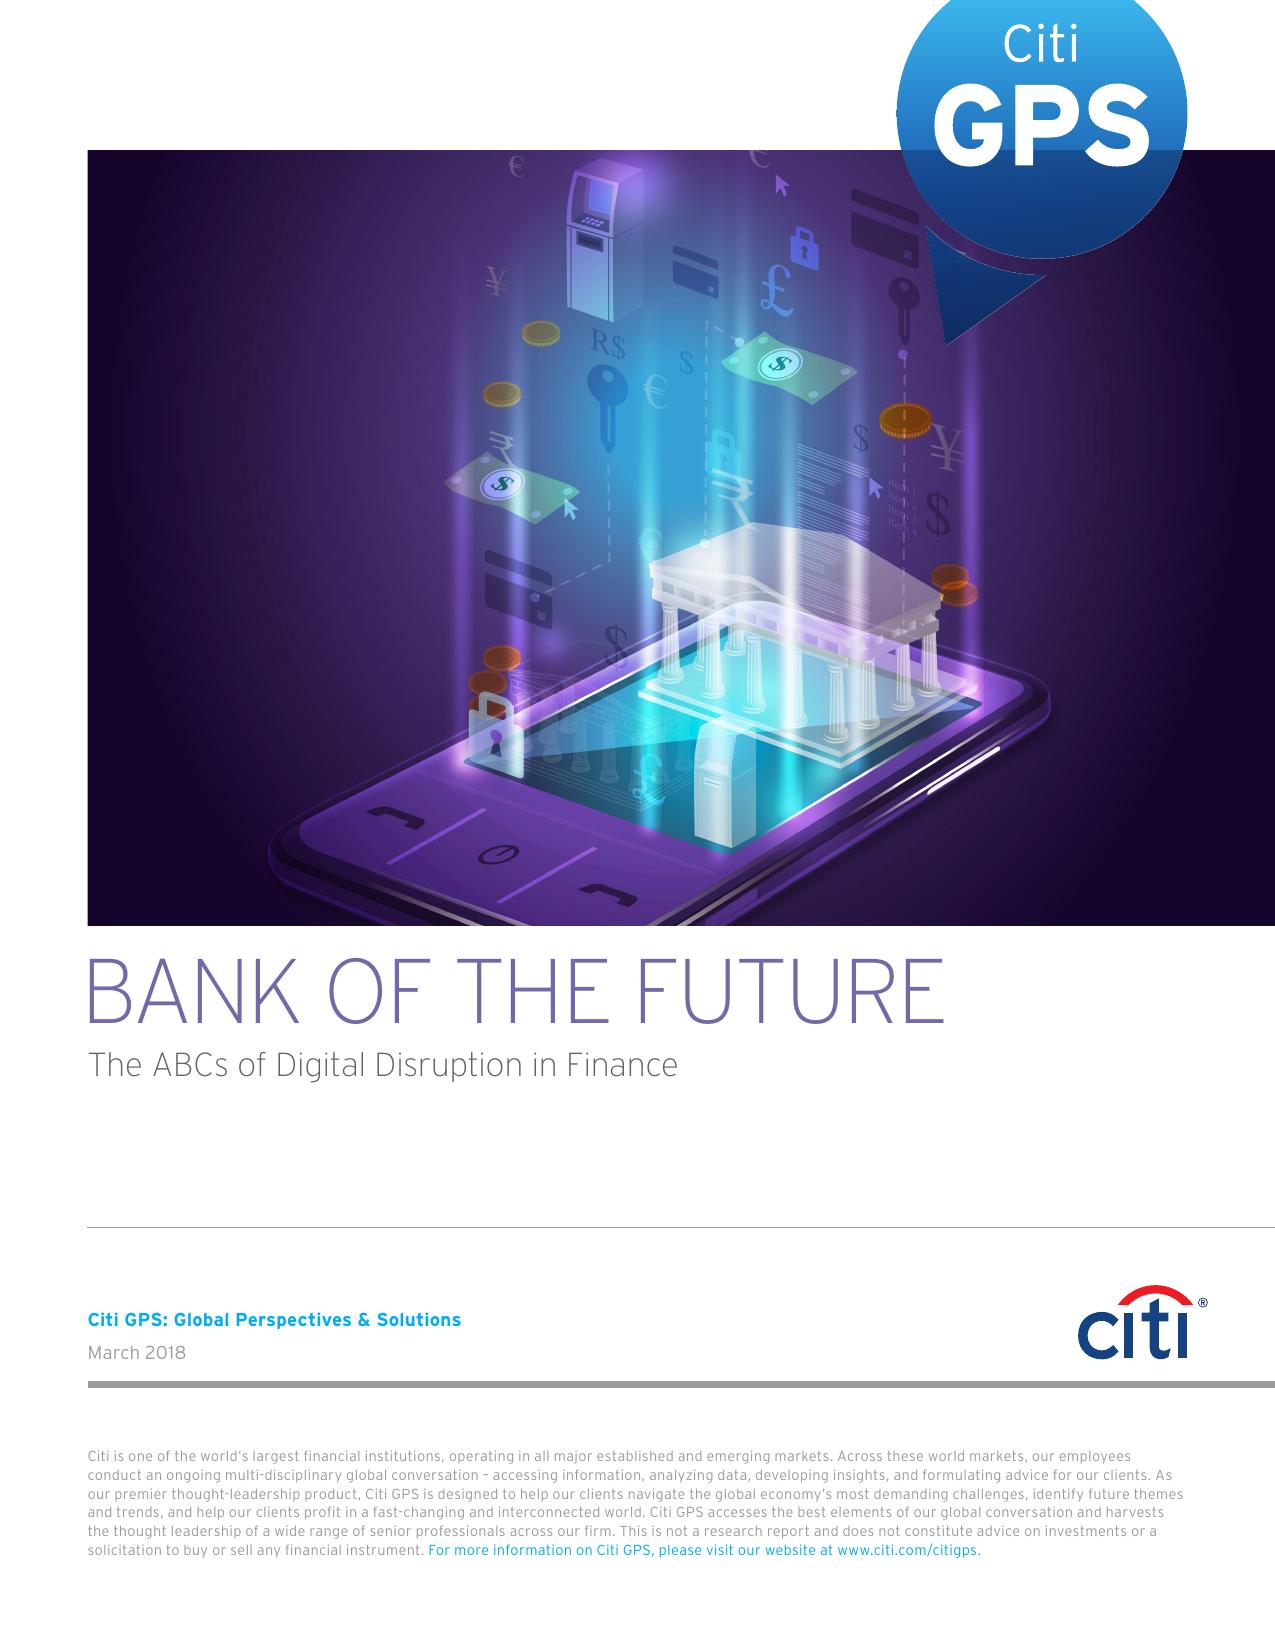 THE BANK OF THE FUTURE: The ABCs of Digital Disruption in Finance